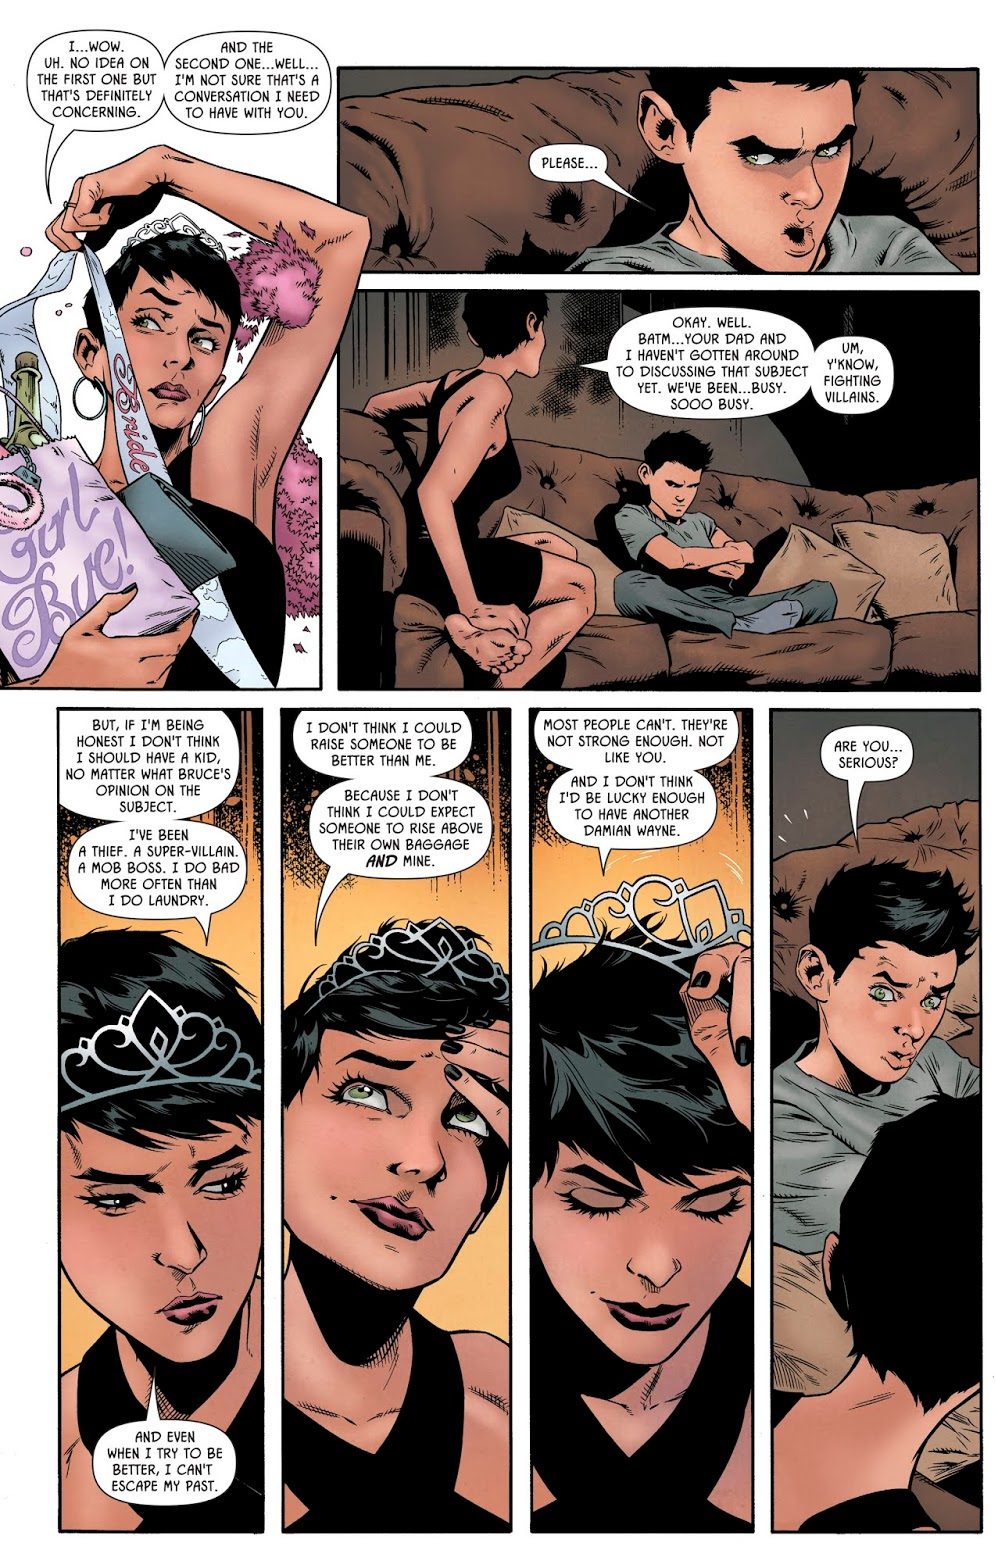 Why Catwoman Doesn't Want To Have Kids 